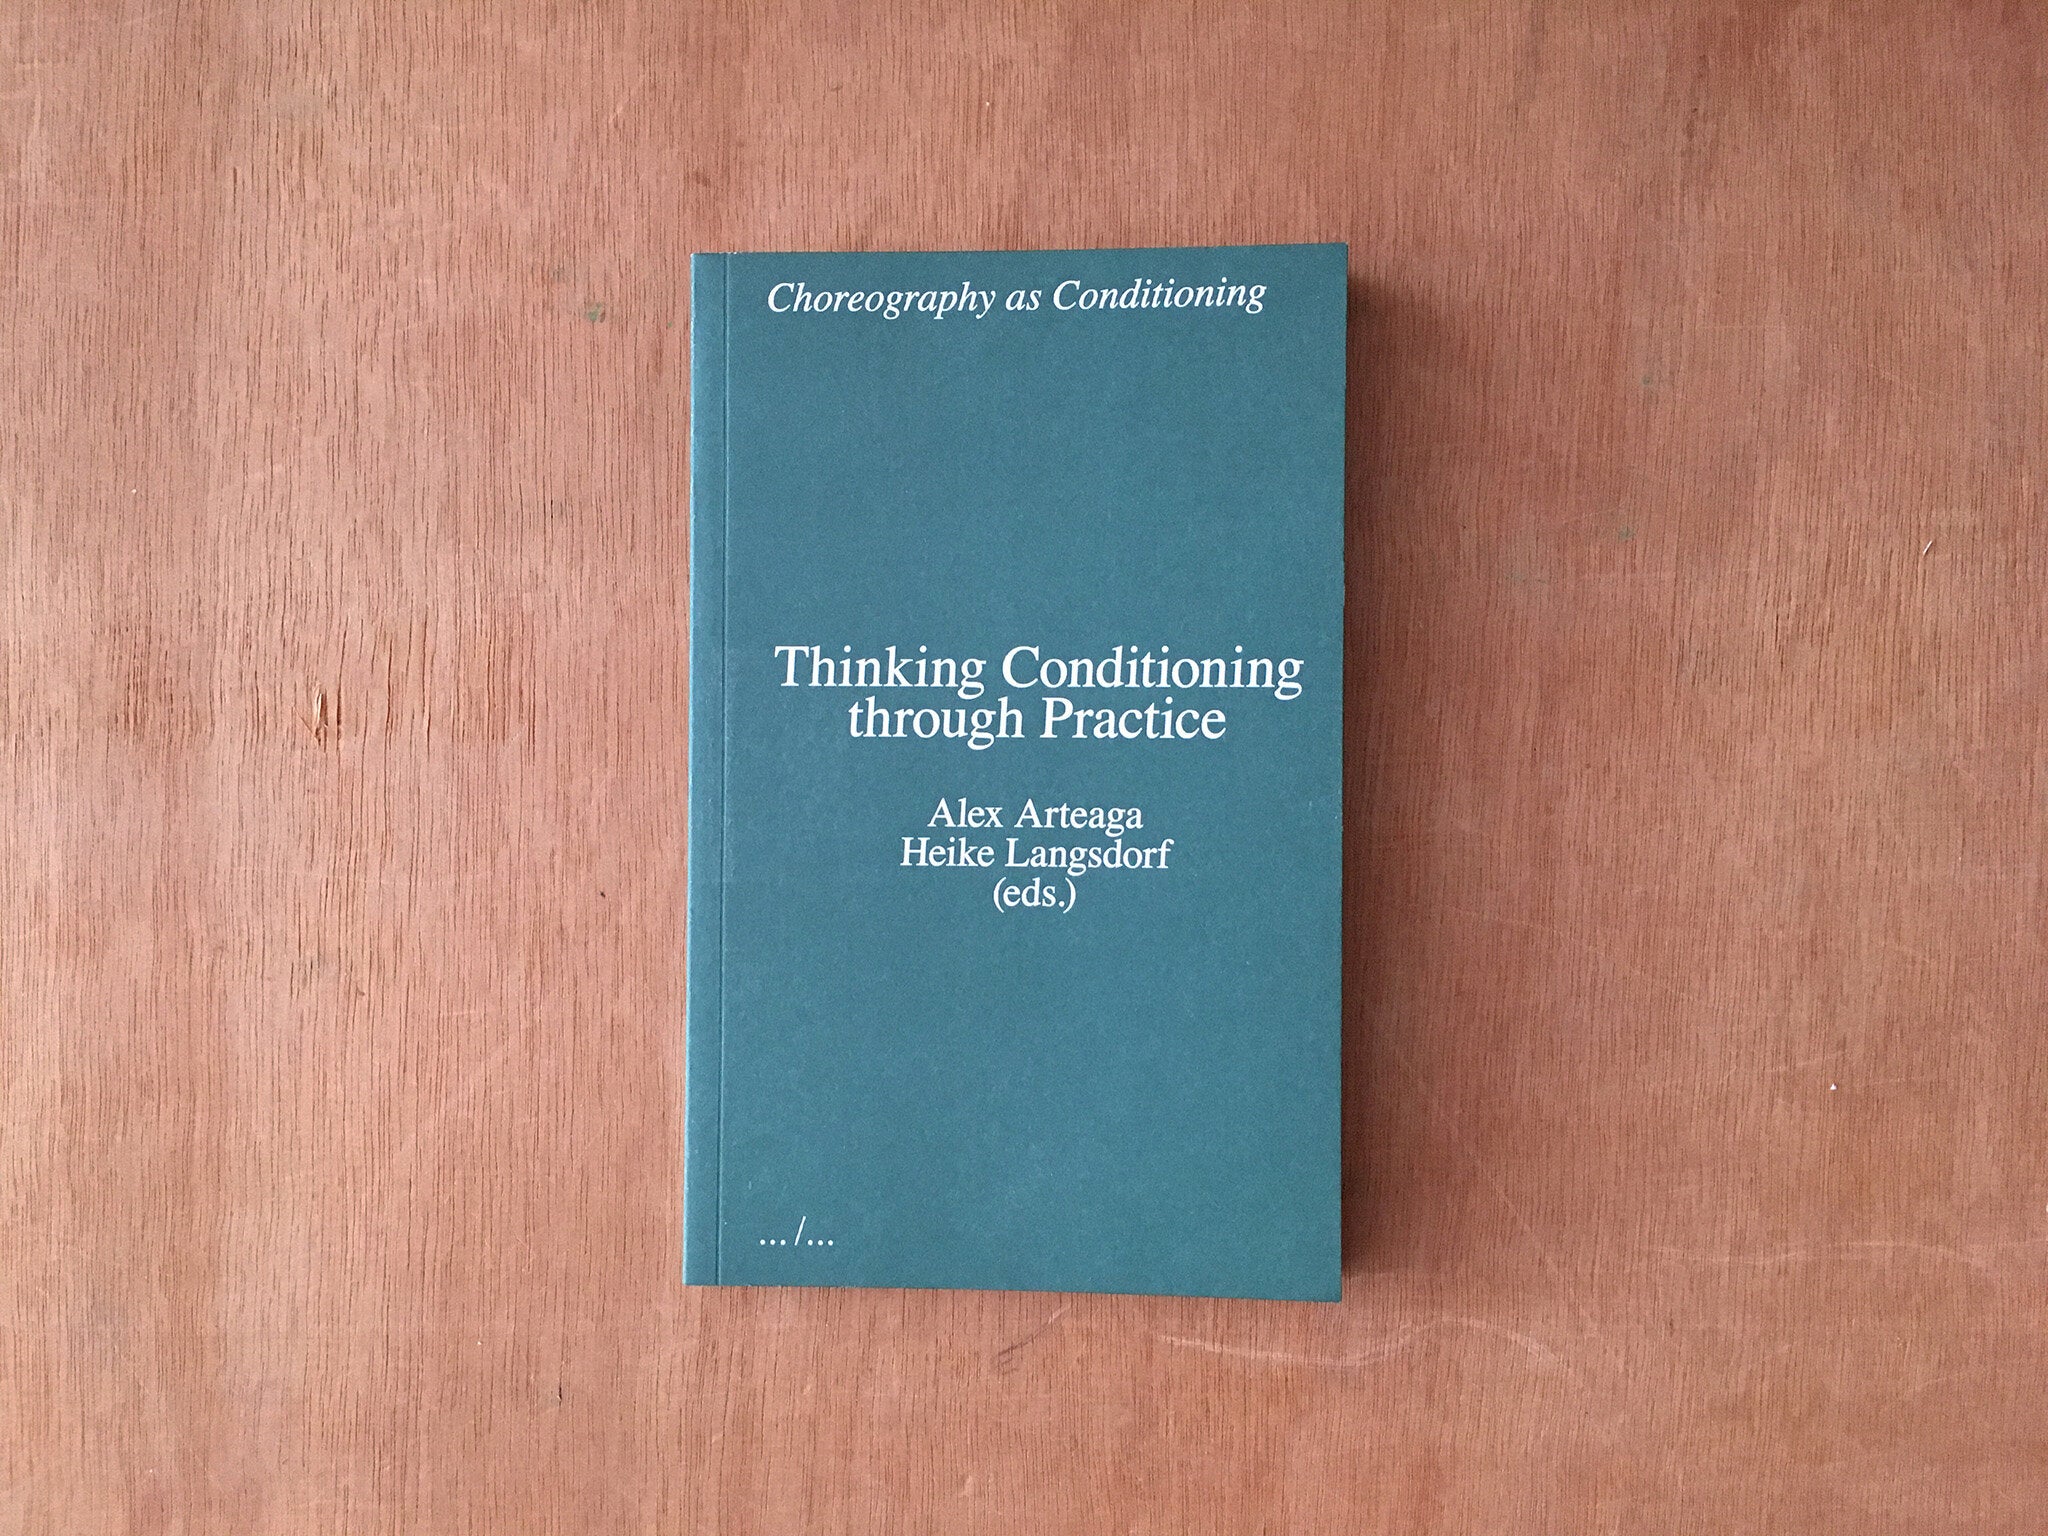 THINKING CONDITIONING THROUGH PRACTICE edited by Alex Arteaga and Heike Langsdorf